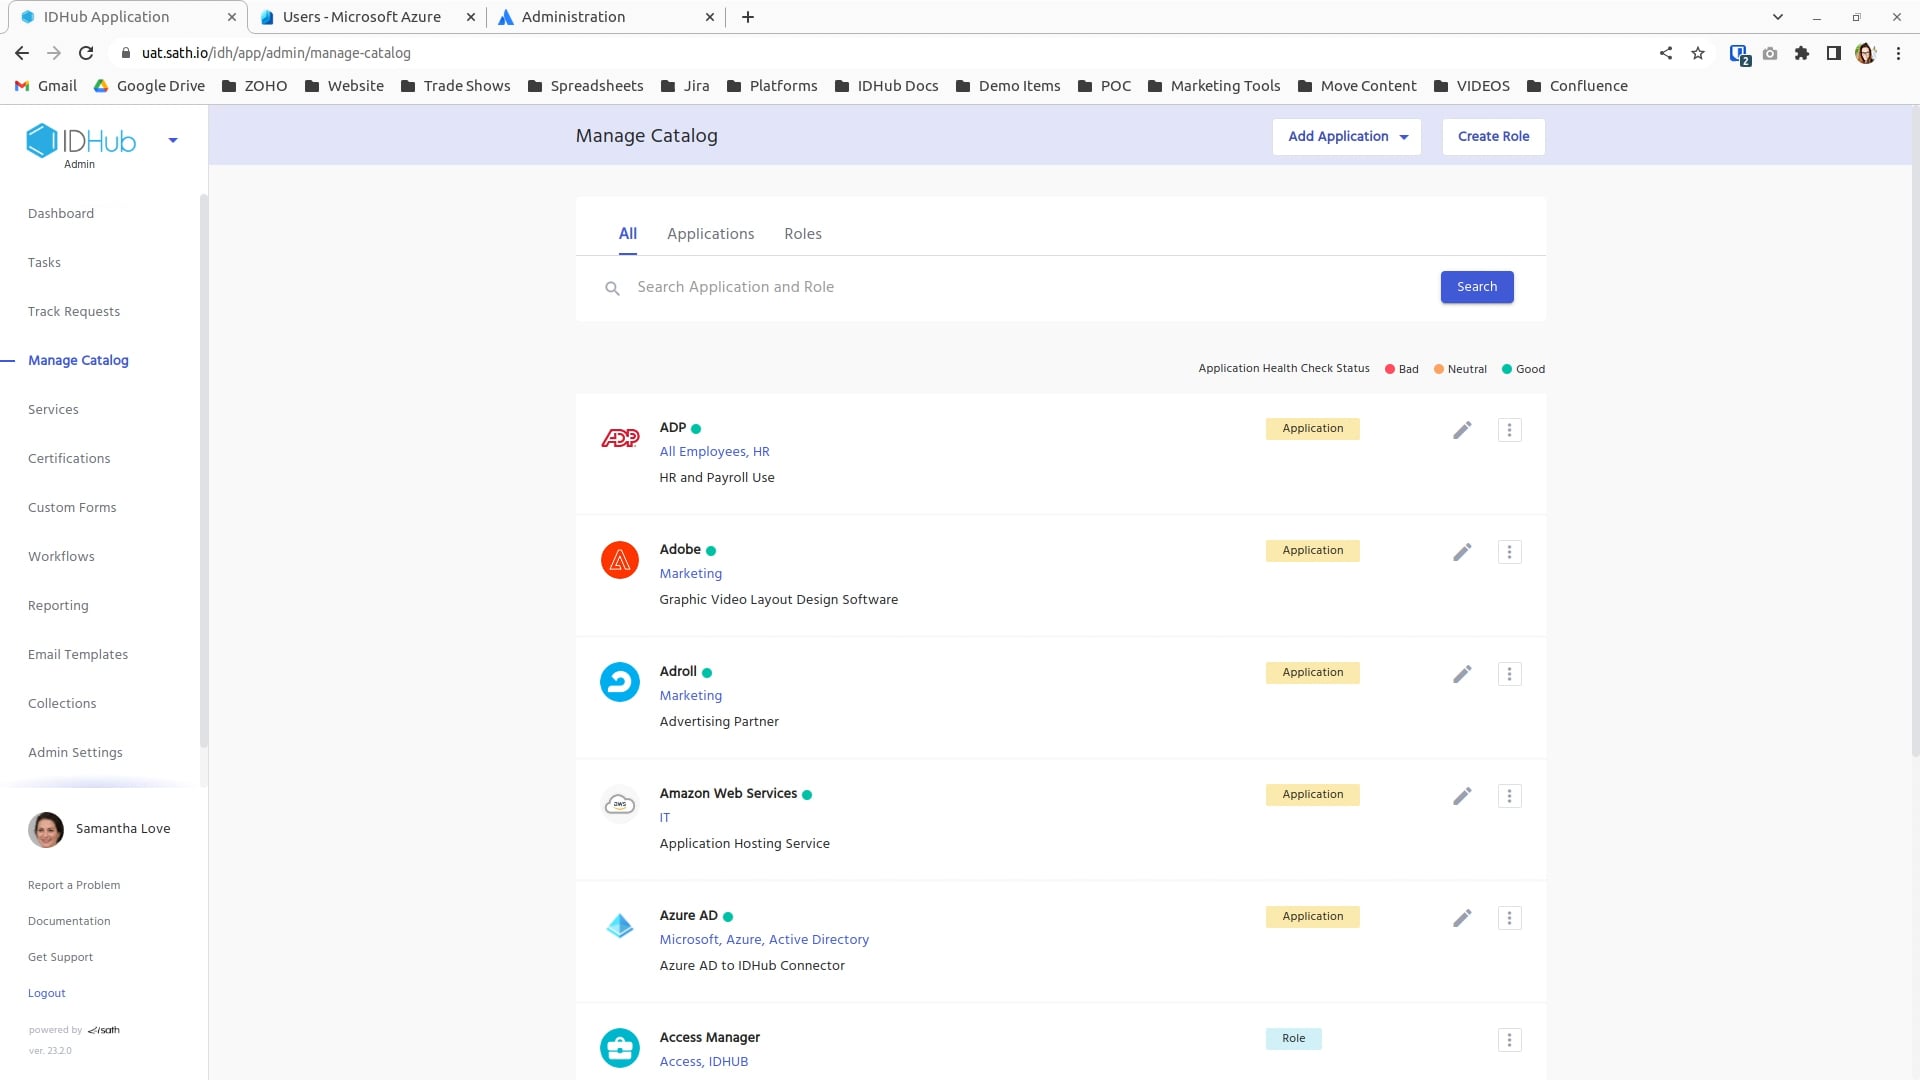 Connection to Azure AD and Jira Software - Add a new user in IDHub and provision to Azure and Jira